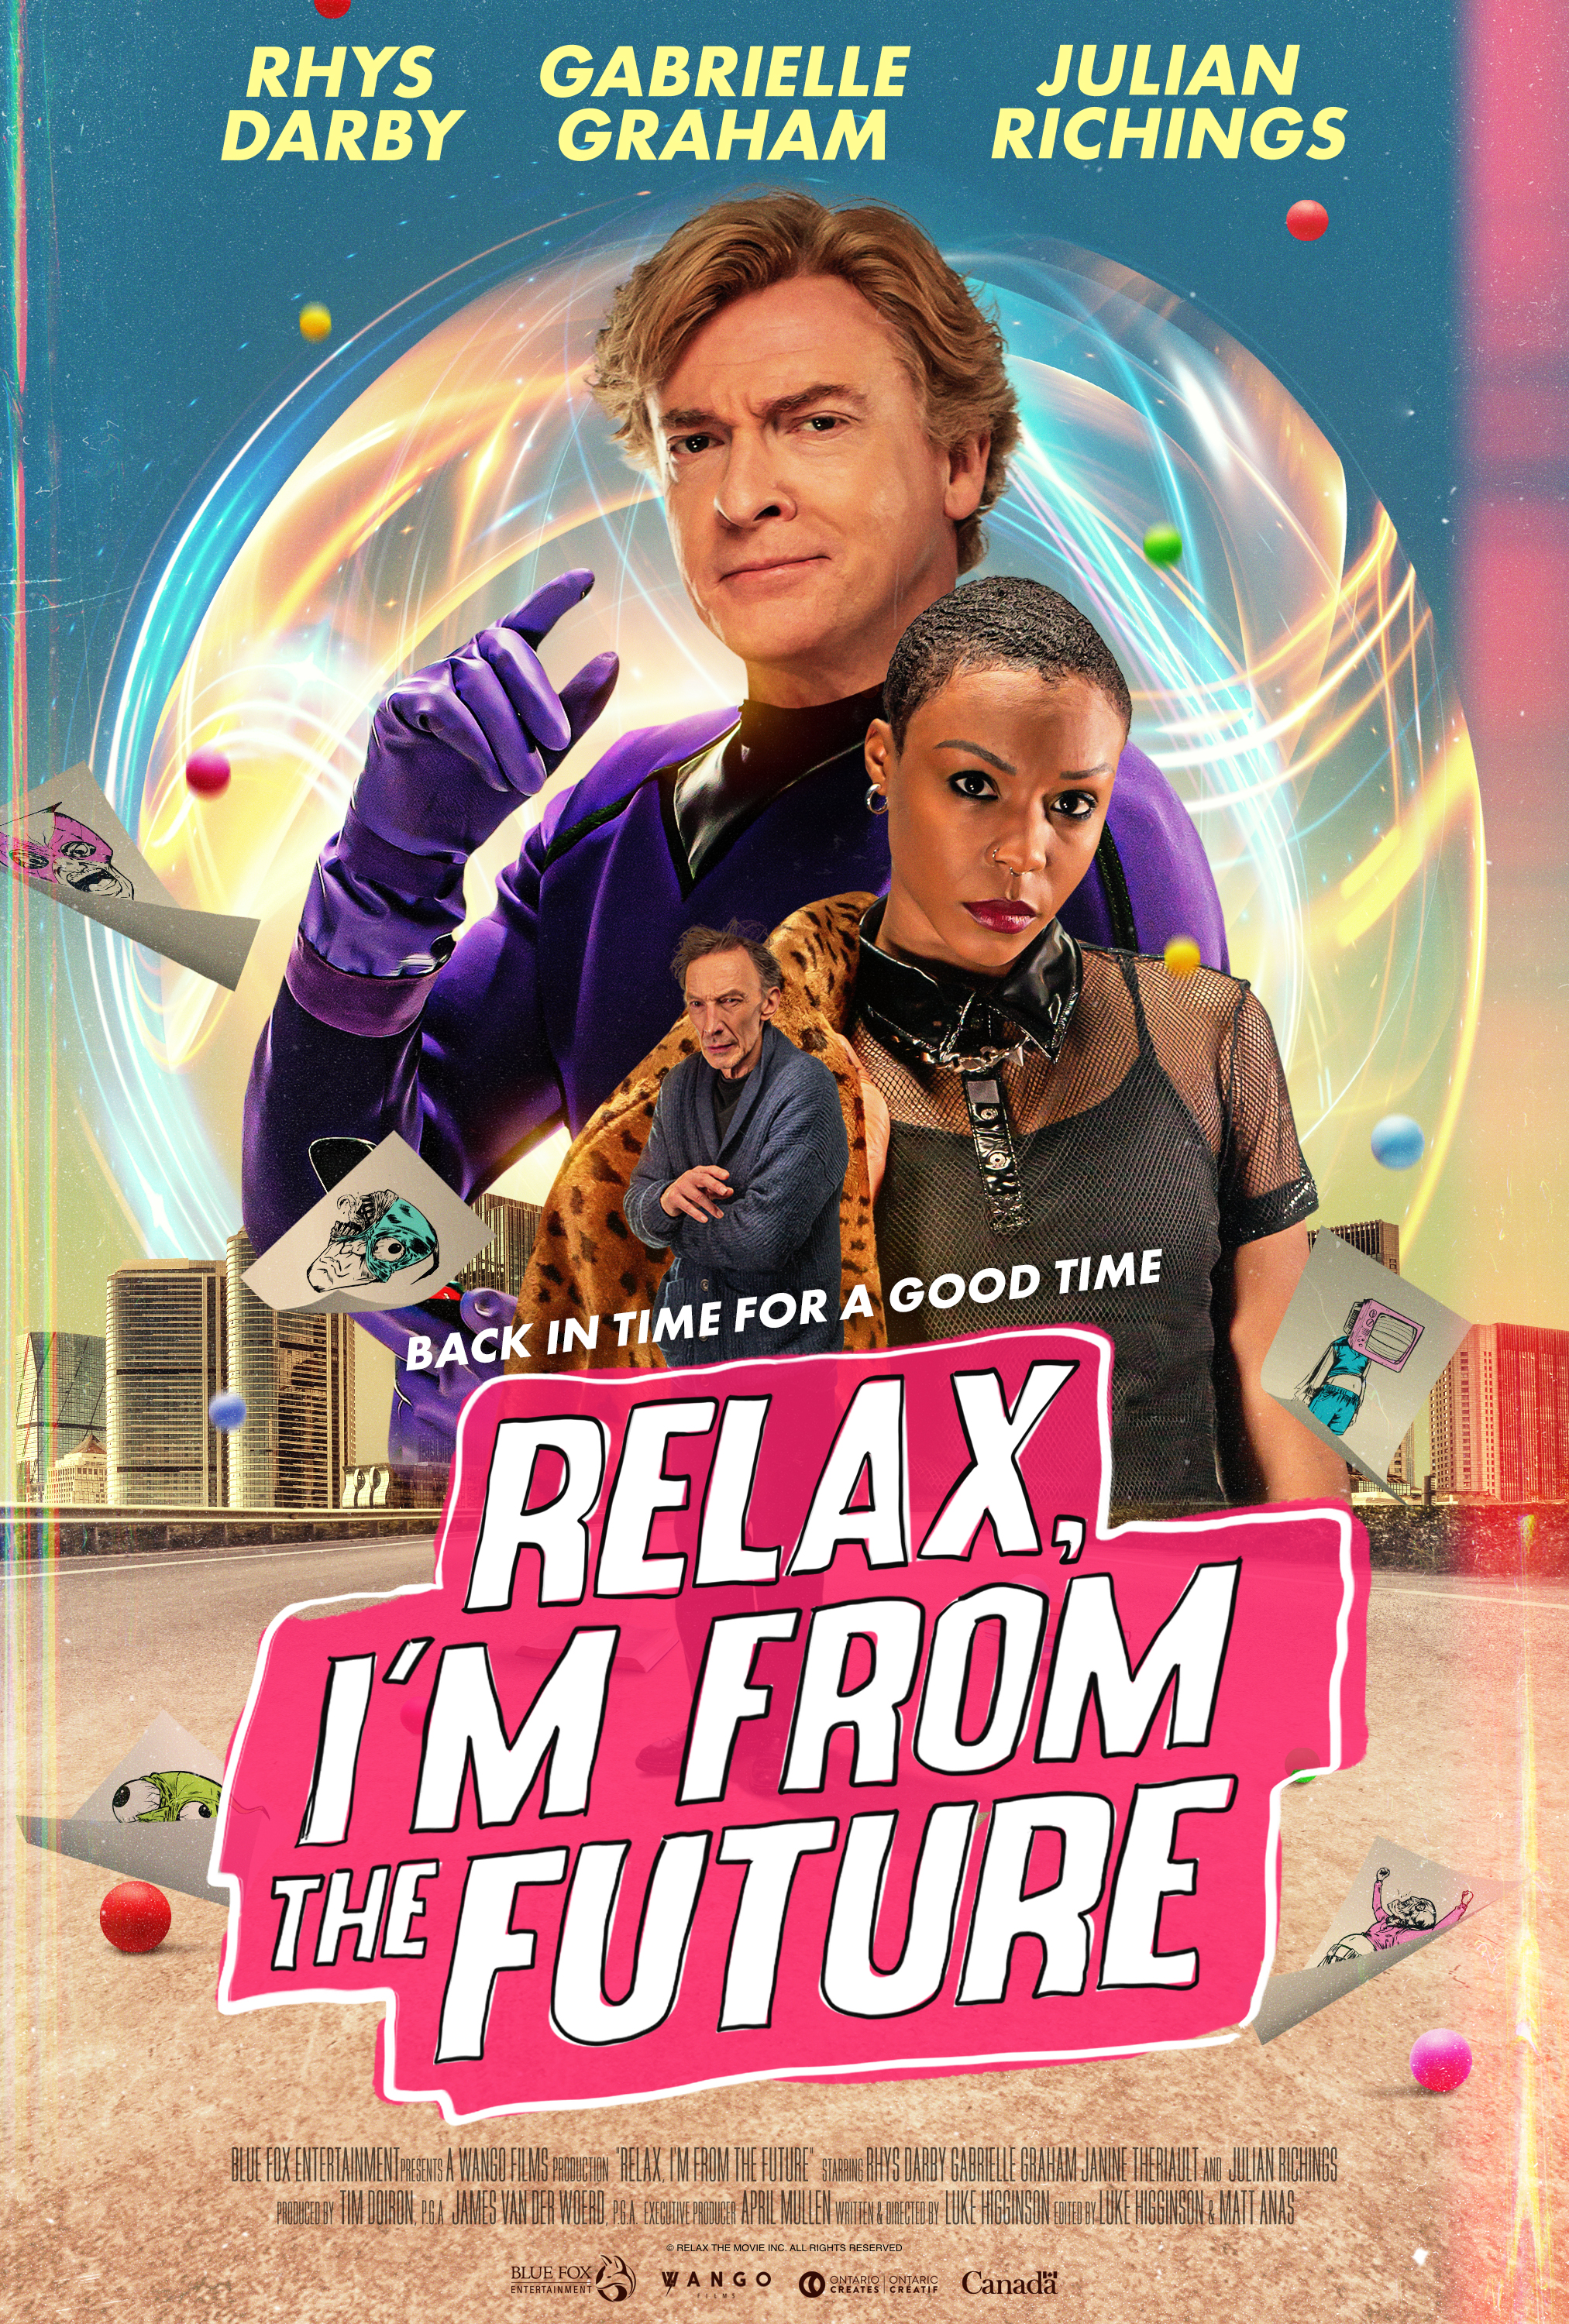 Colorful sci-fi background with three figures in the front, with the title reading "Relax, I'm from the future,"